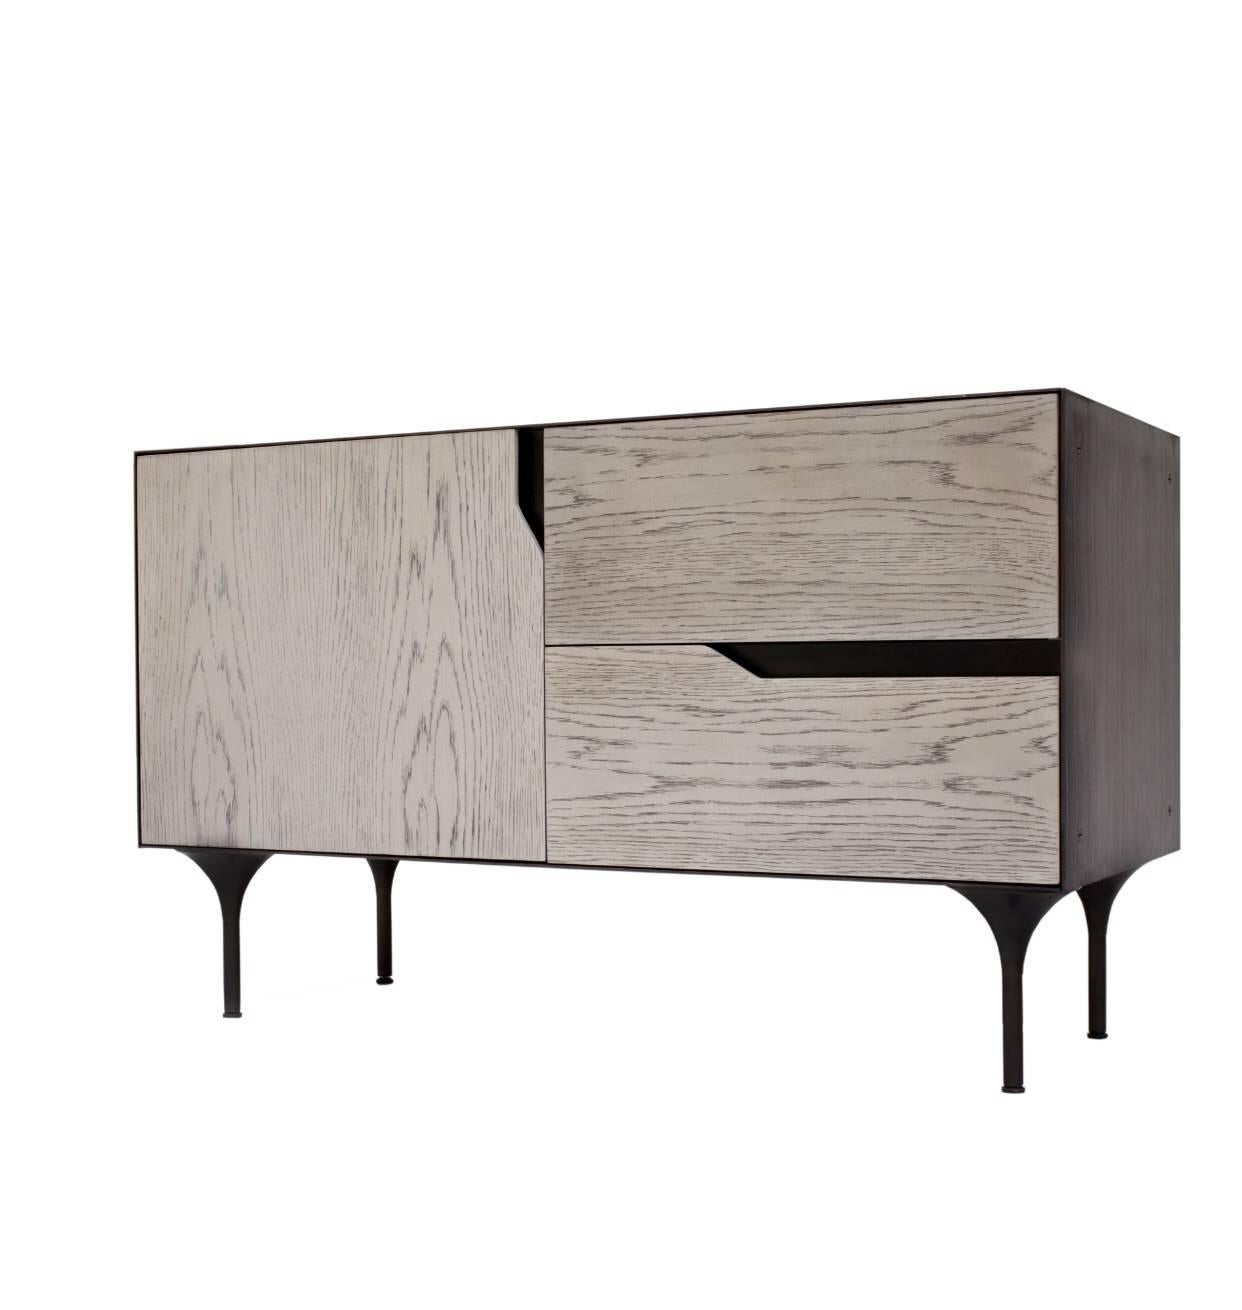 Inspired by the Greek legend, the Titan junior credenza, in a shorter length than our original namesake model, projects a masculine aesthetic given by the use of materials and its proportions, a heavy steel carcass embraces a wooden body, all